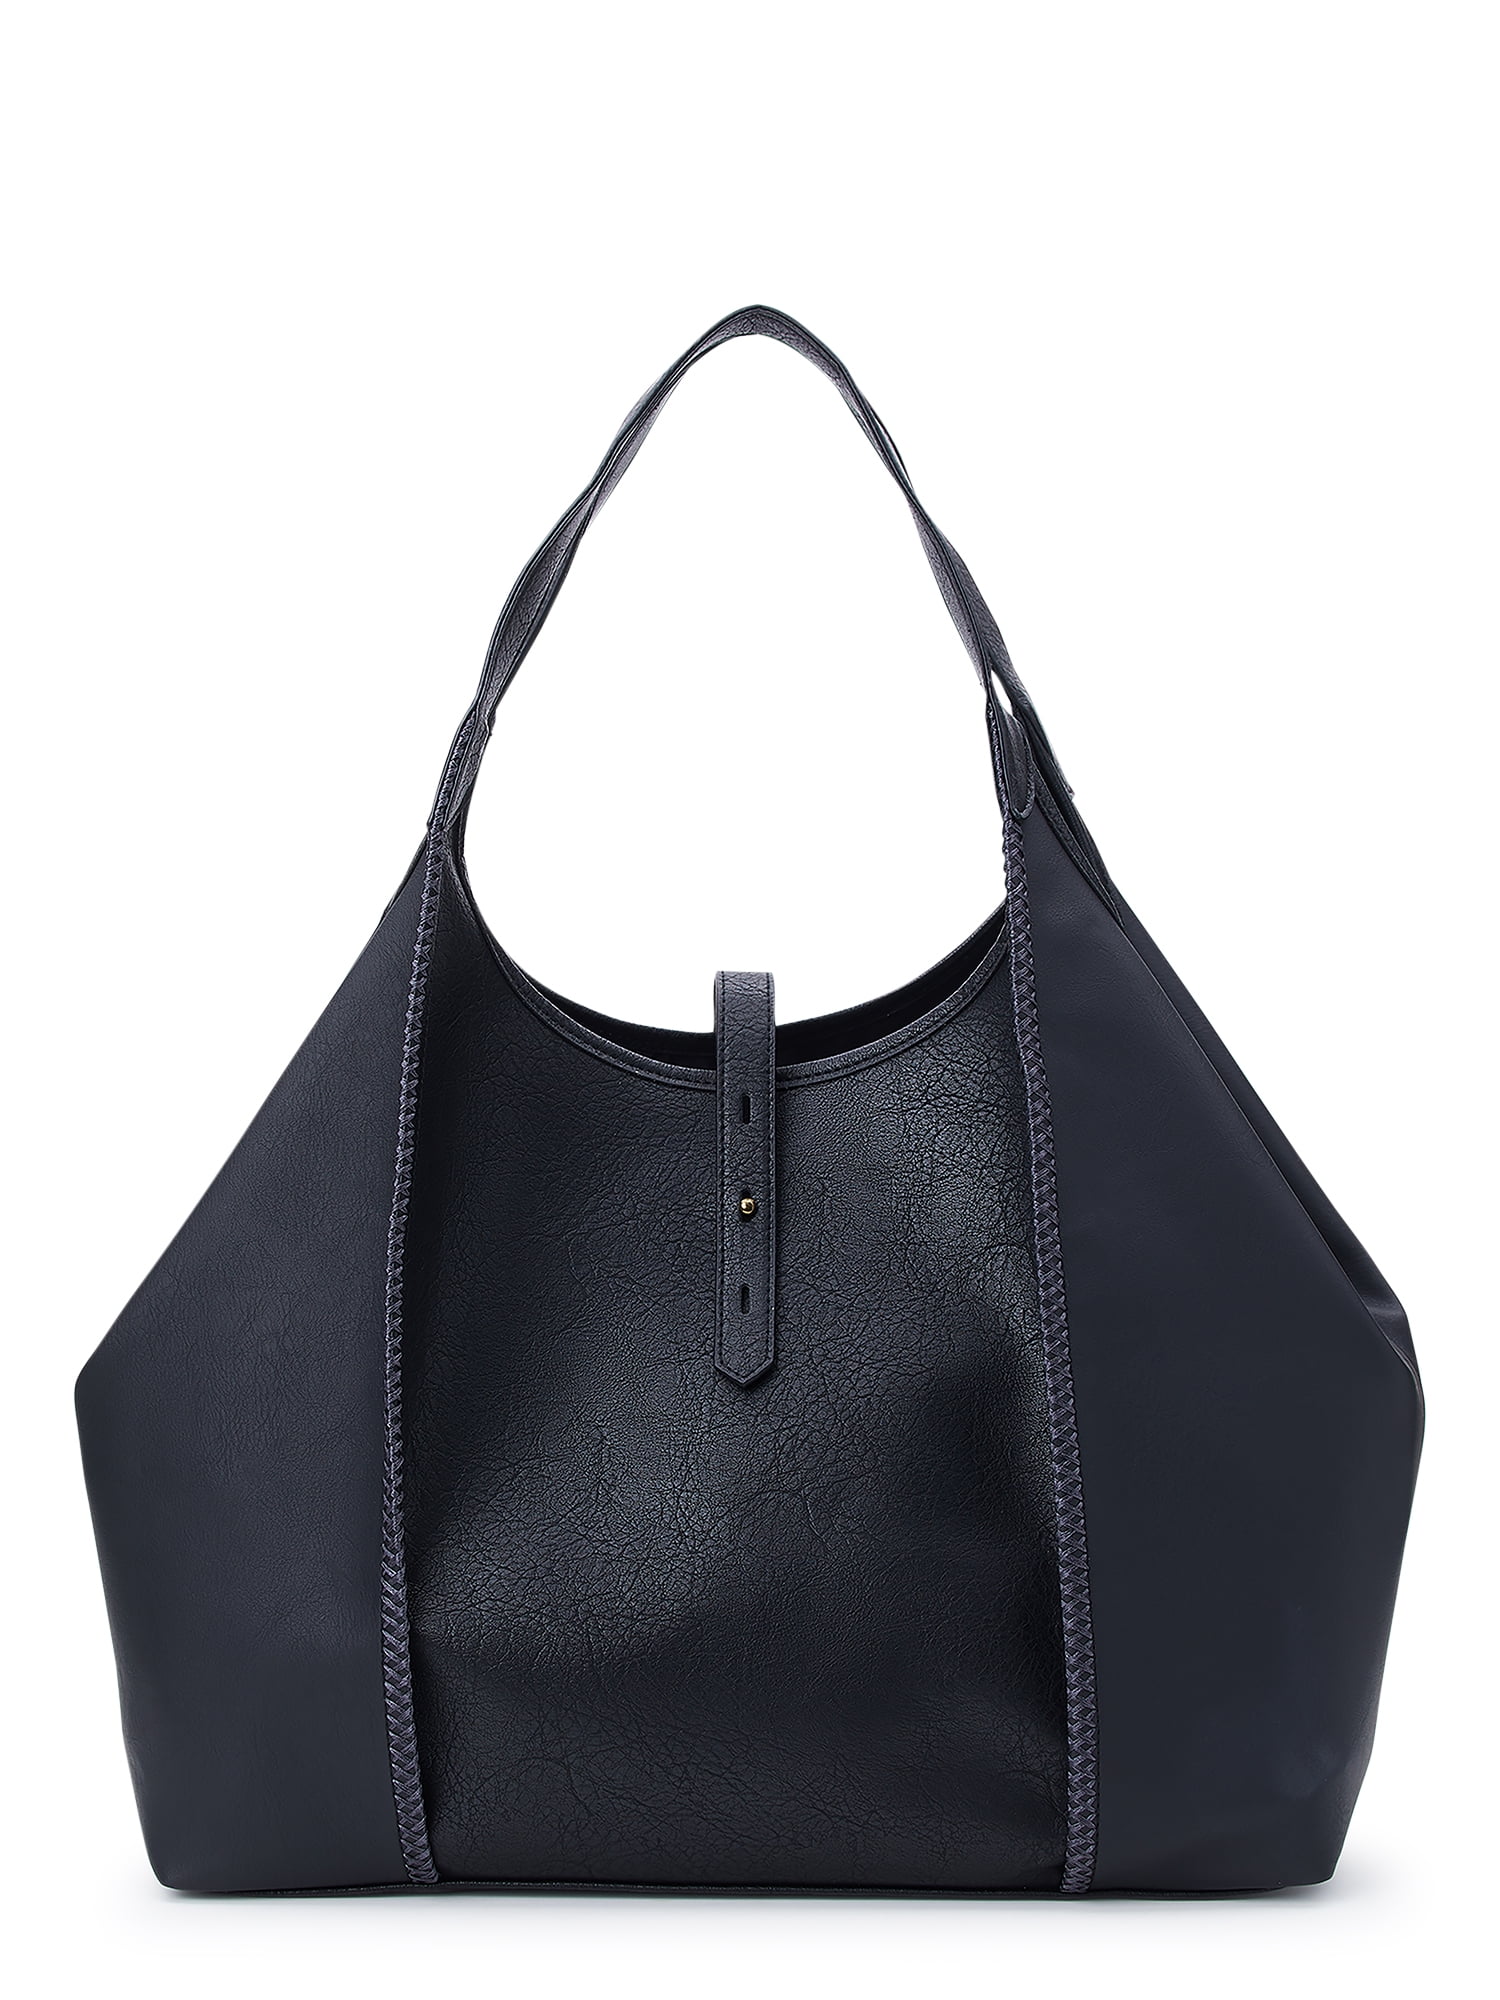 Large Handmade Leather Tote Bag, The Avery Tote